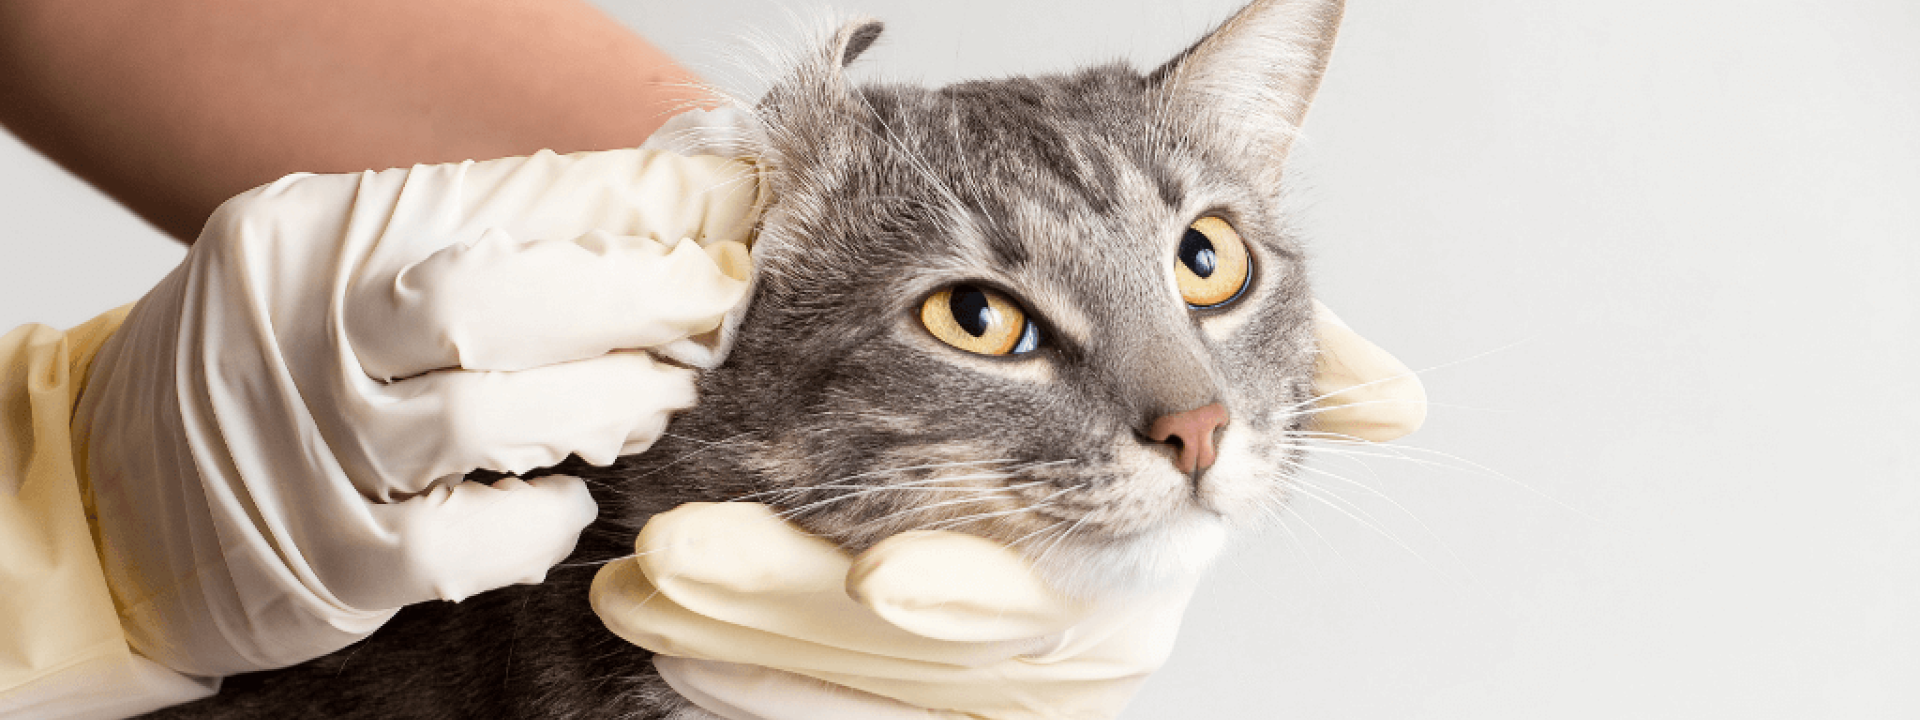 How to Tell if Your Cat Has an Ear Infection